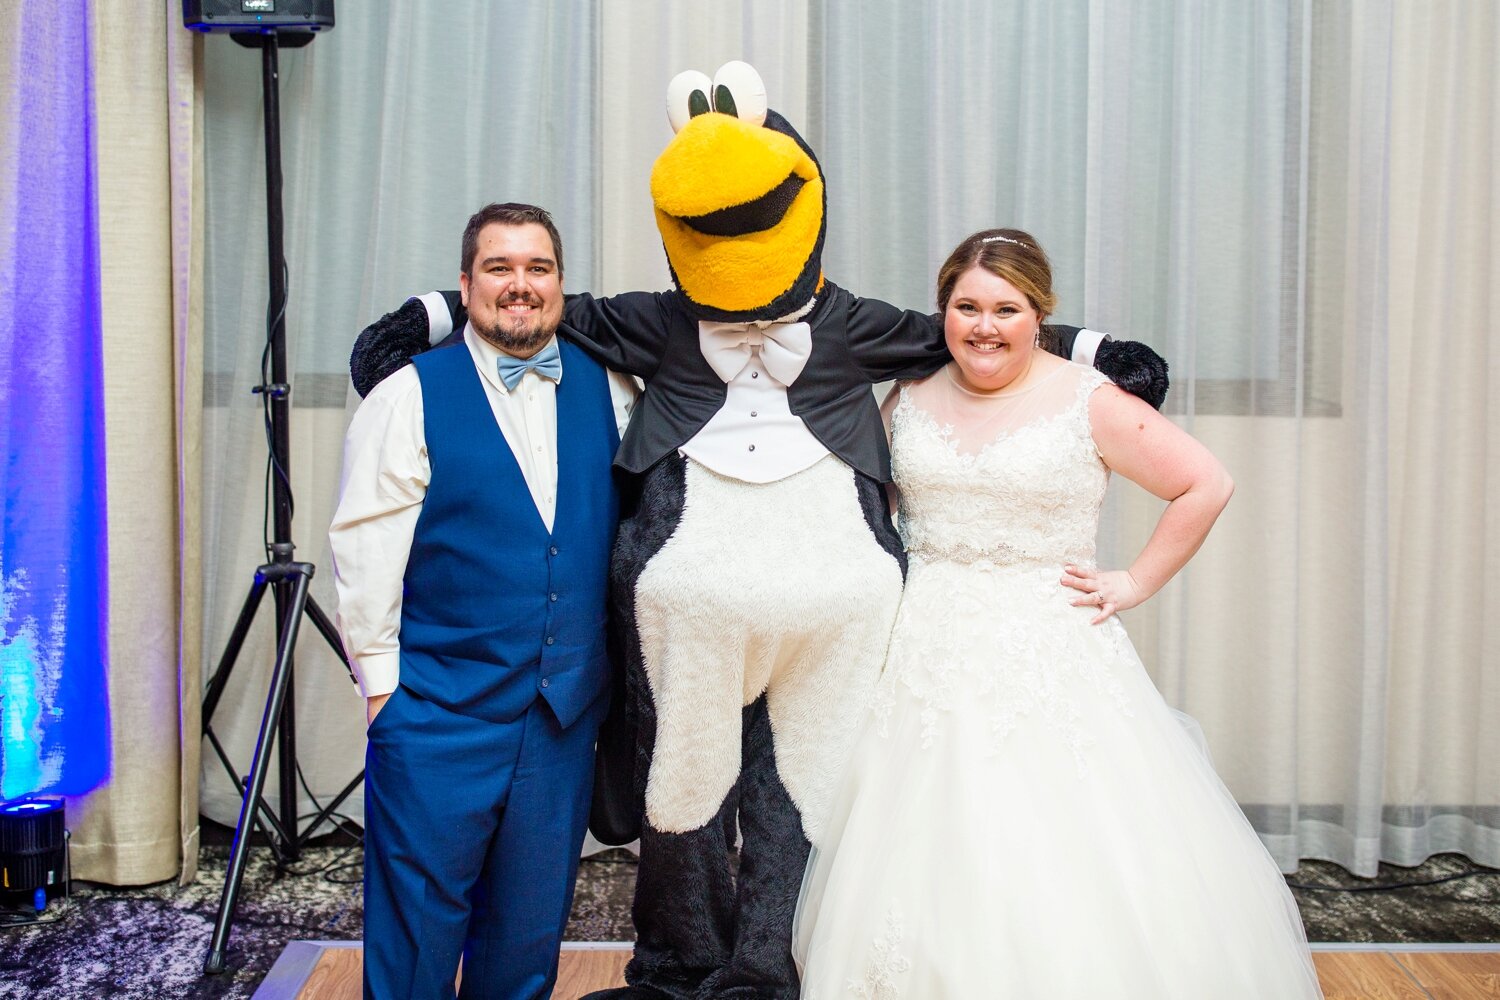  And they had a fun visitor at their reception! 